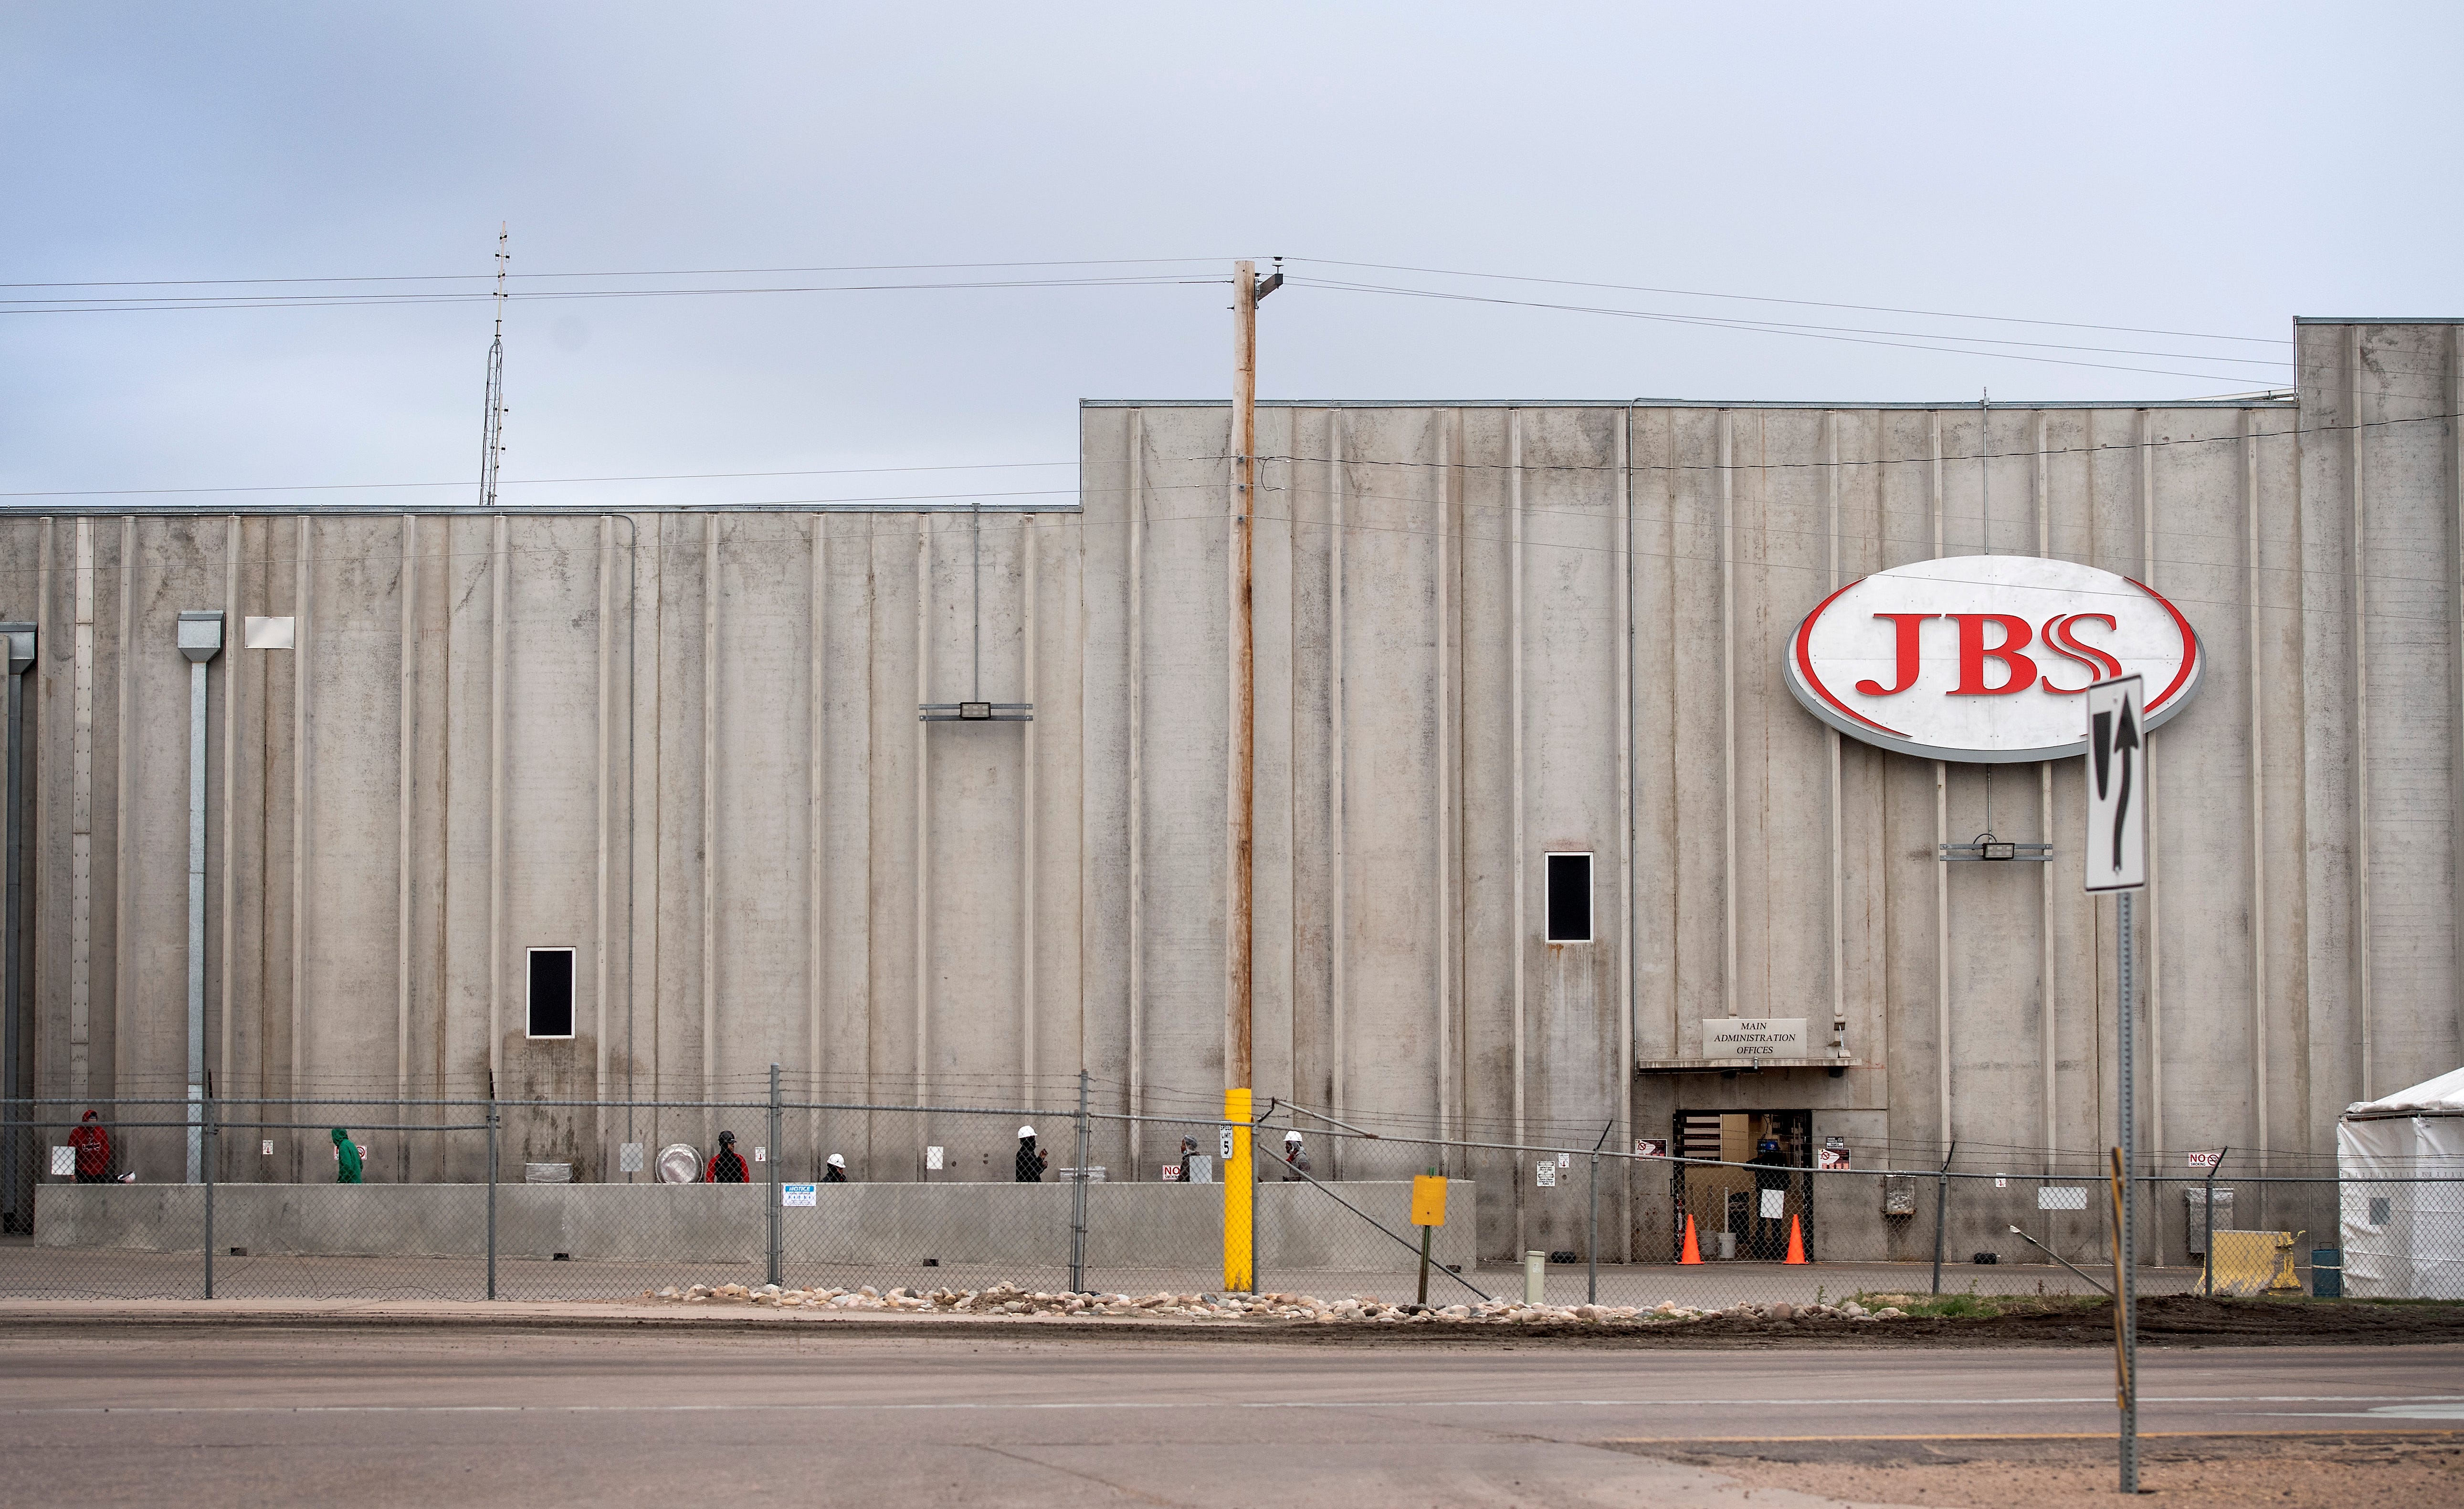 The JBS meatpacking plant in Greeley, Colorado.